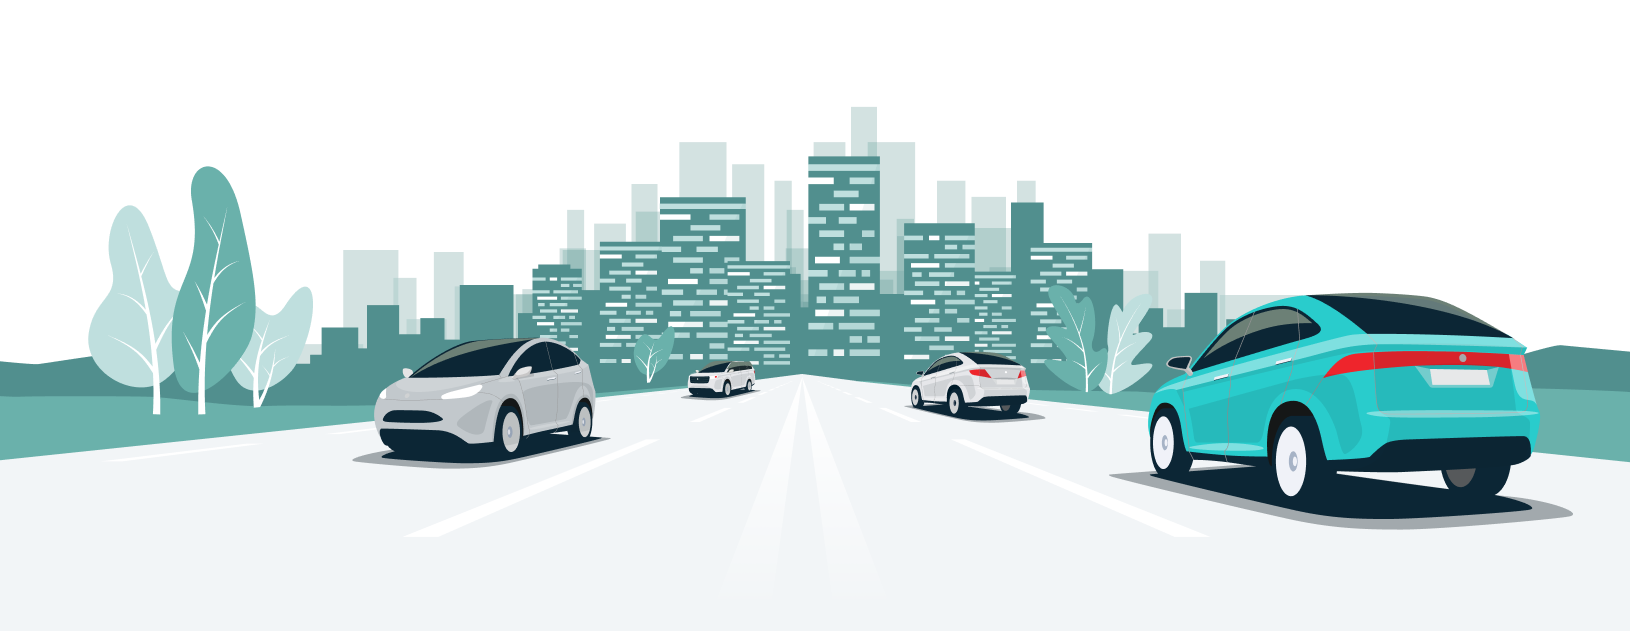 Illustration: Cars in front of a city